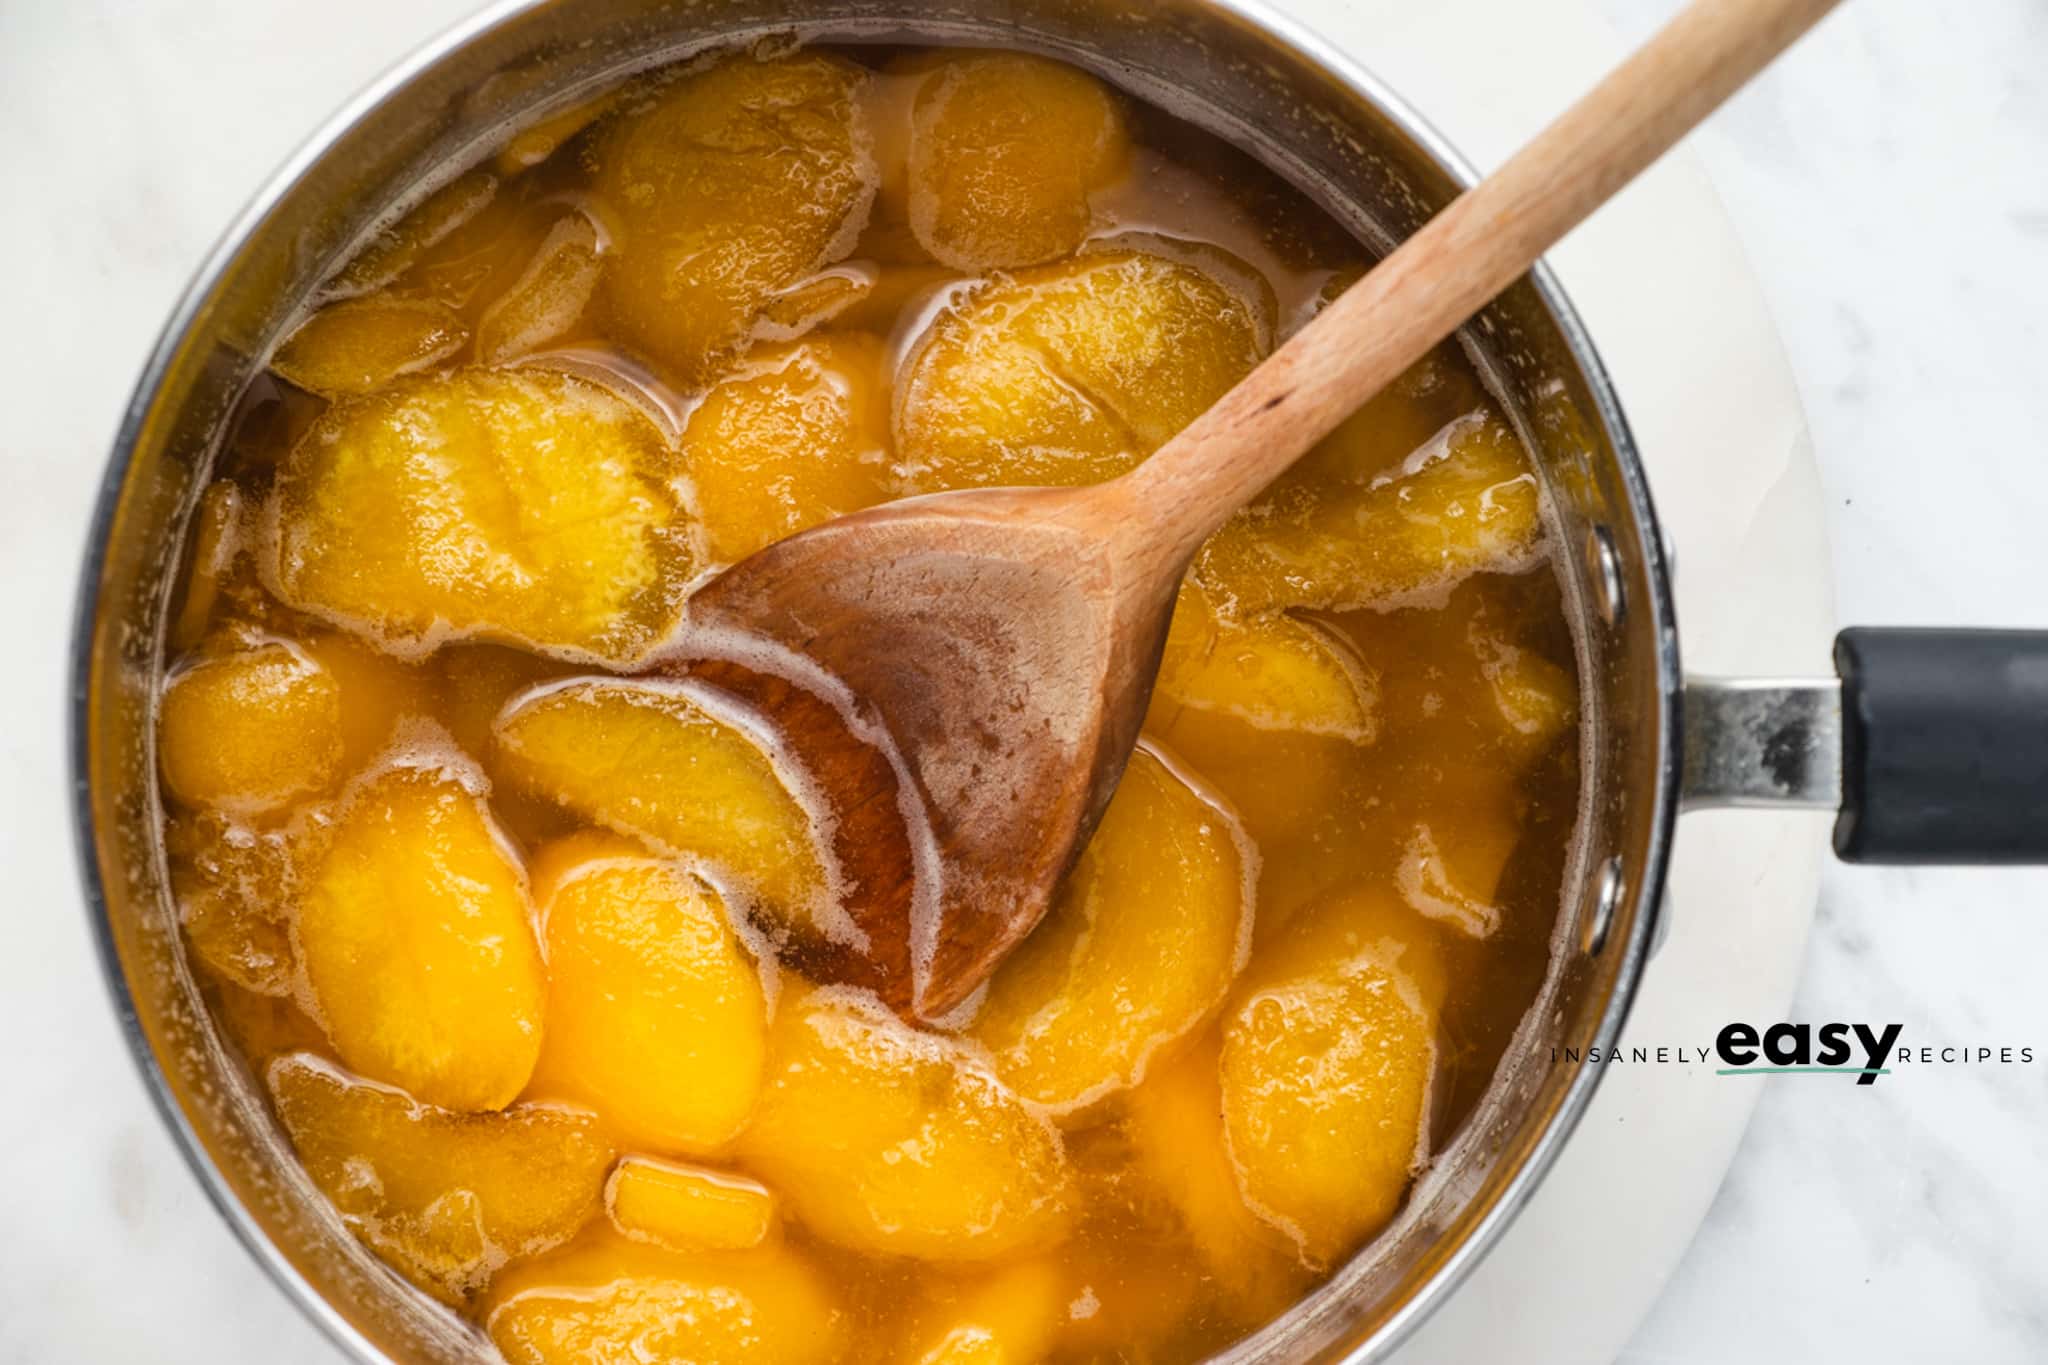 photo of ingredients to make peach simple syrup in a sauce pan with a wooden spoon mixing the ingredients